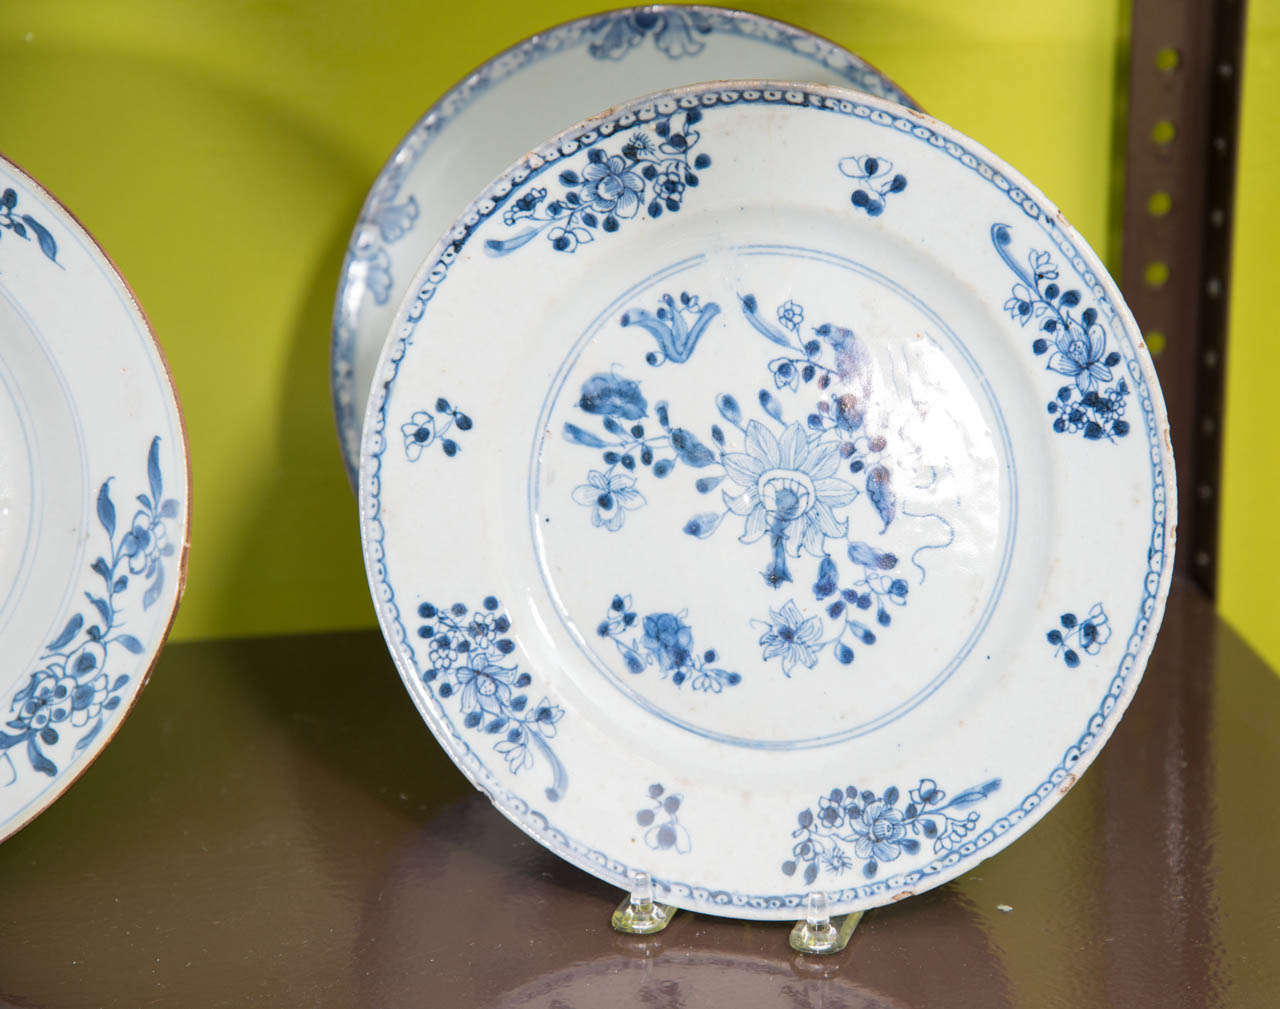 Chinese Export Porcelain Plates 2